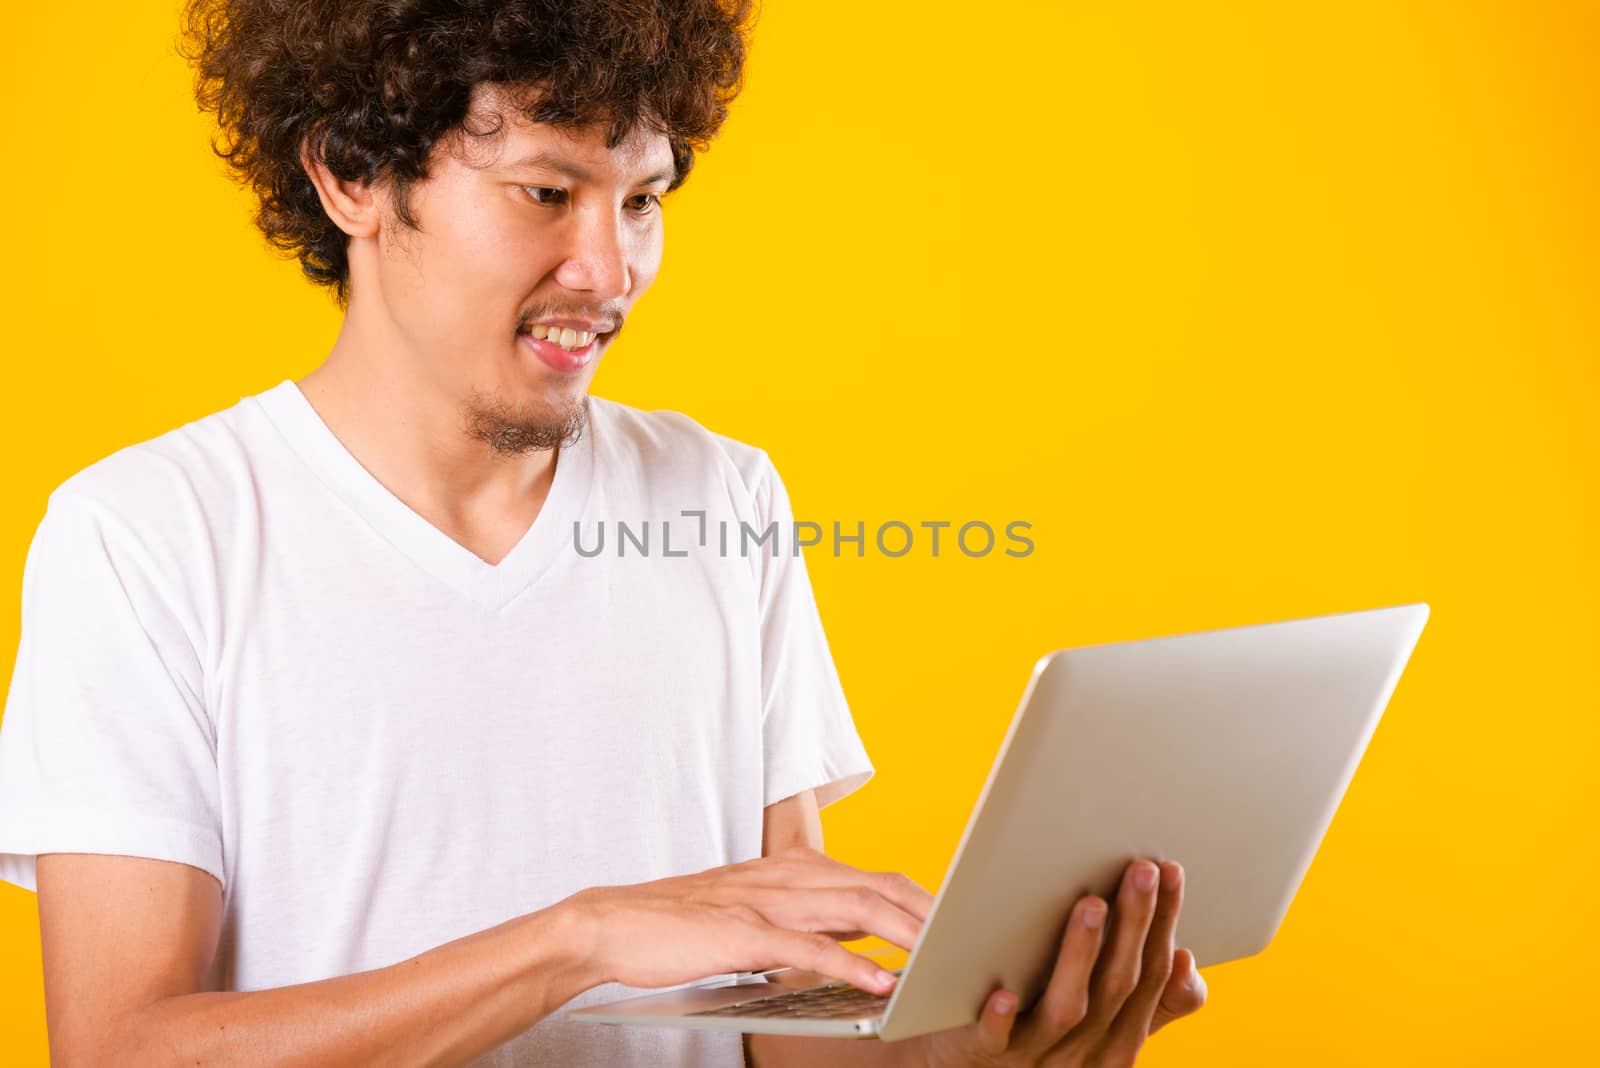 Asian handsome man with curly hair using laptop computer isolate by Sorapop